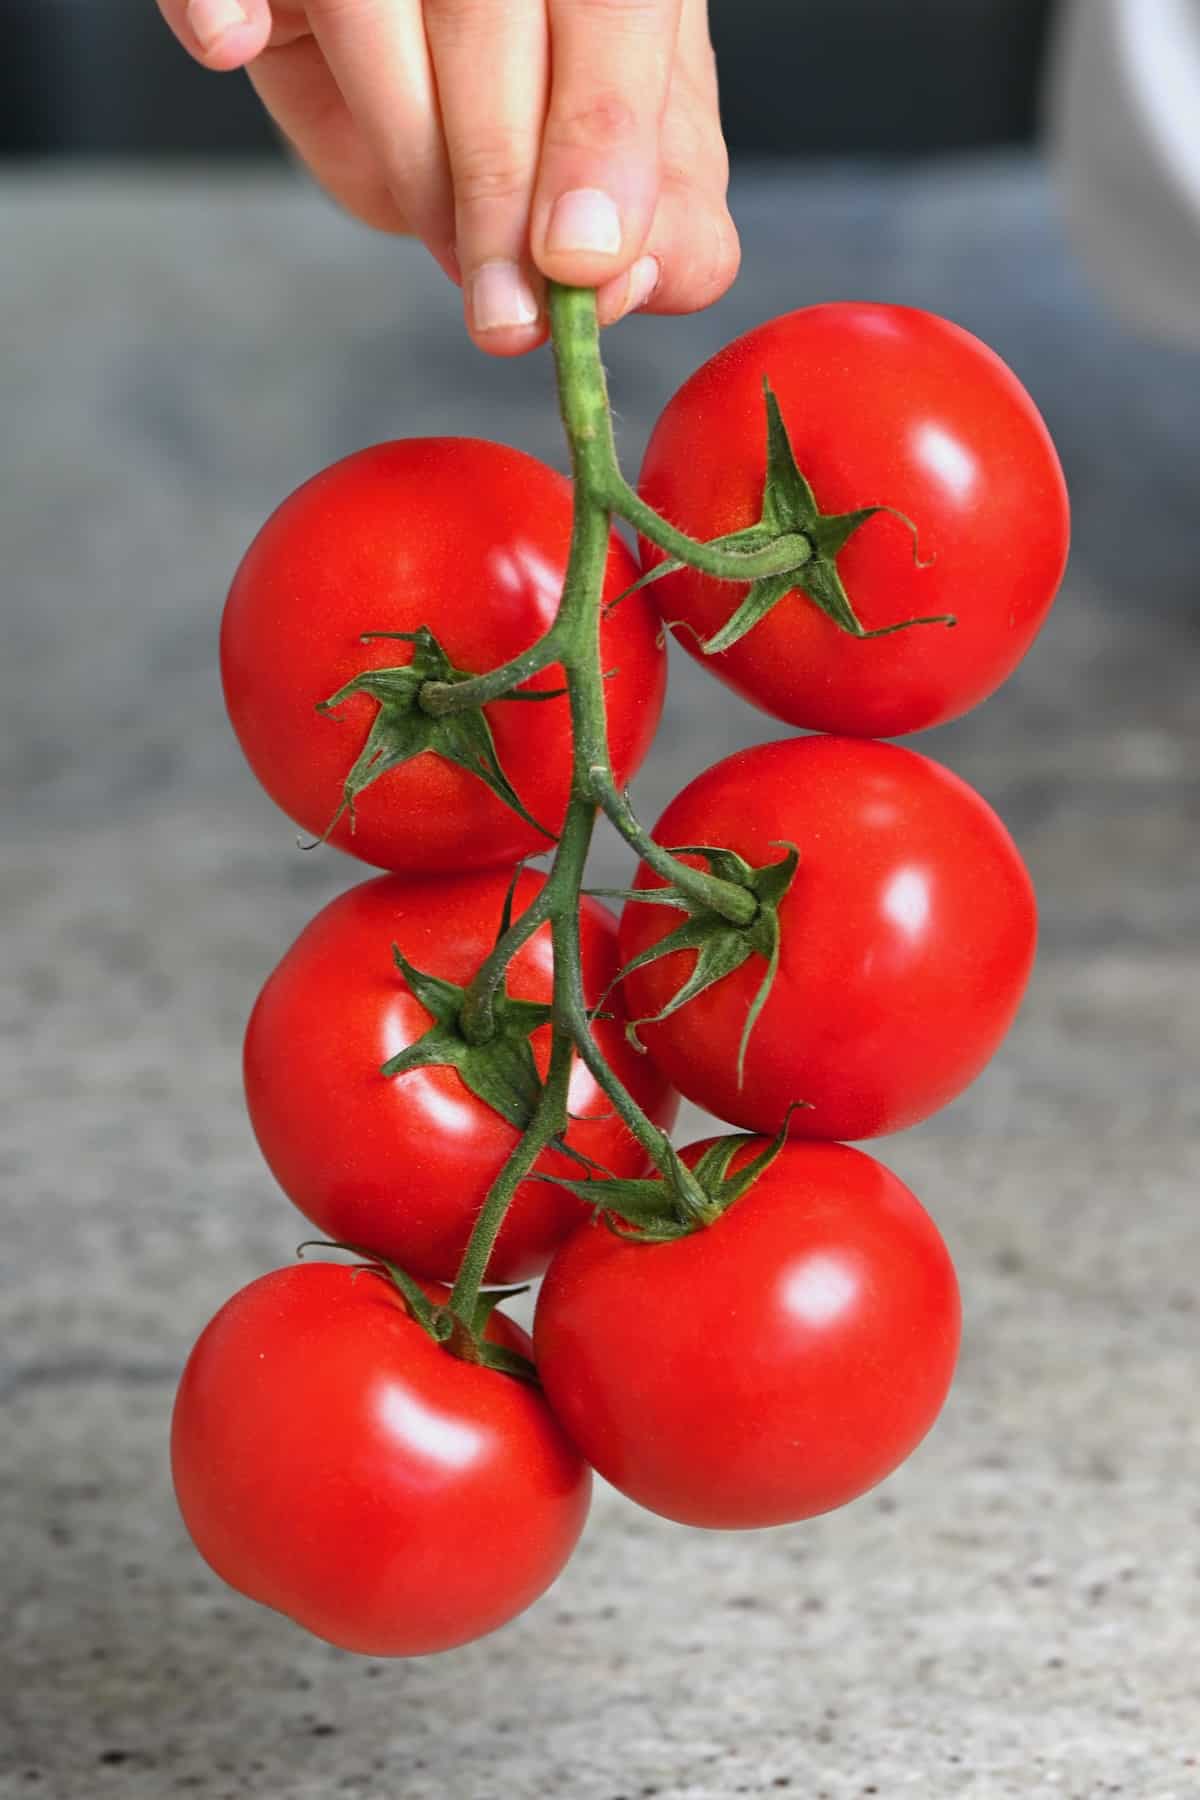 Red tomatoes on a vine